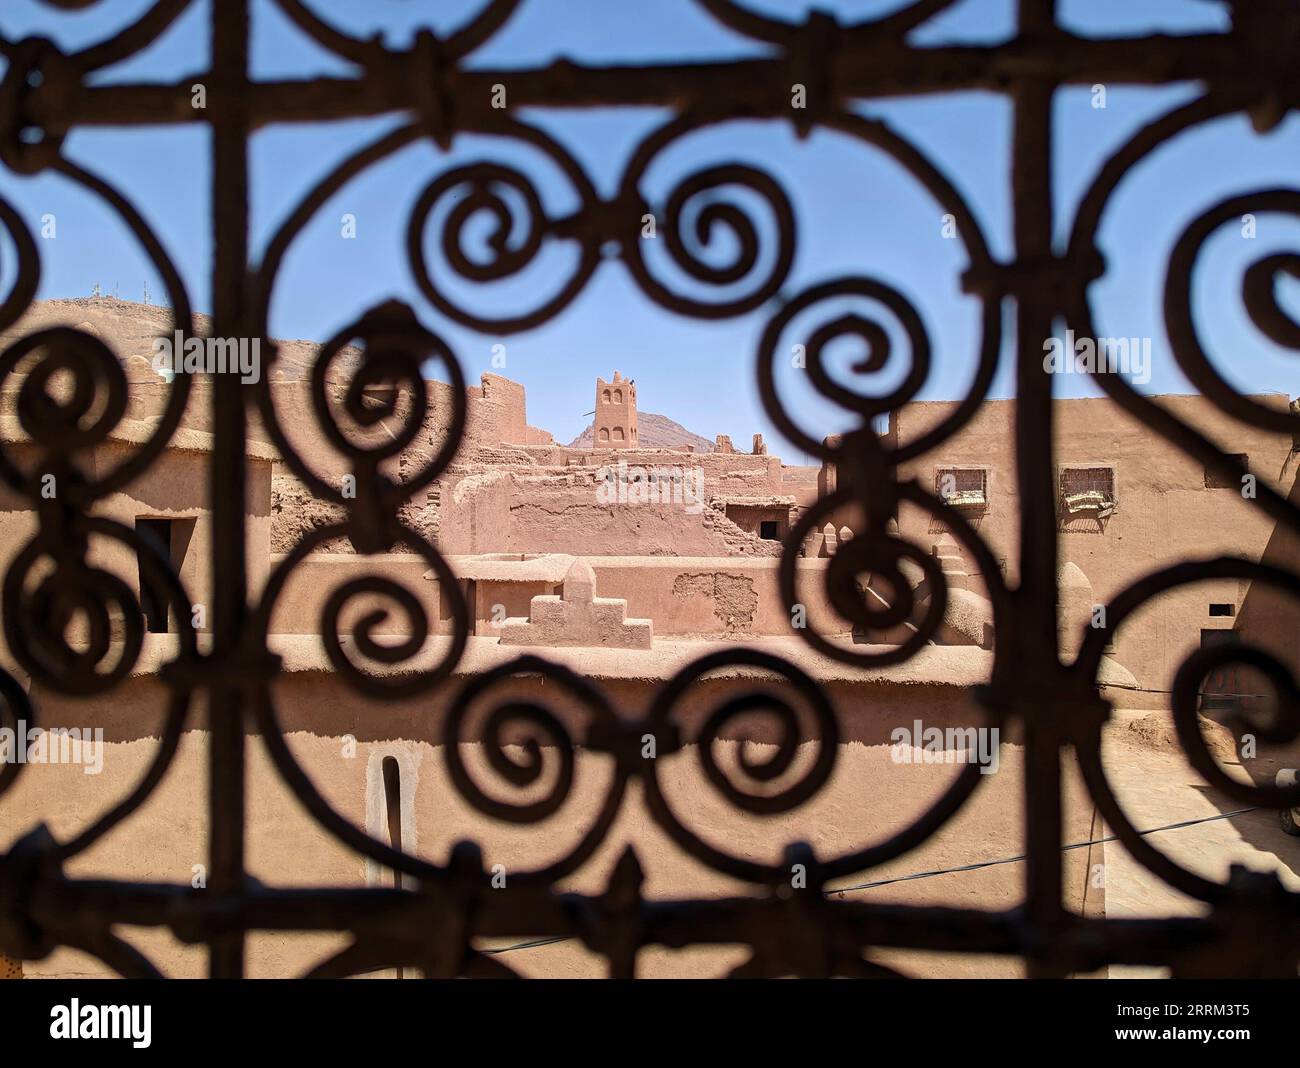 Ornate traditional window grid of a berber house ruin in the city center of Amezrou, Morocco Stock Photo